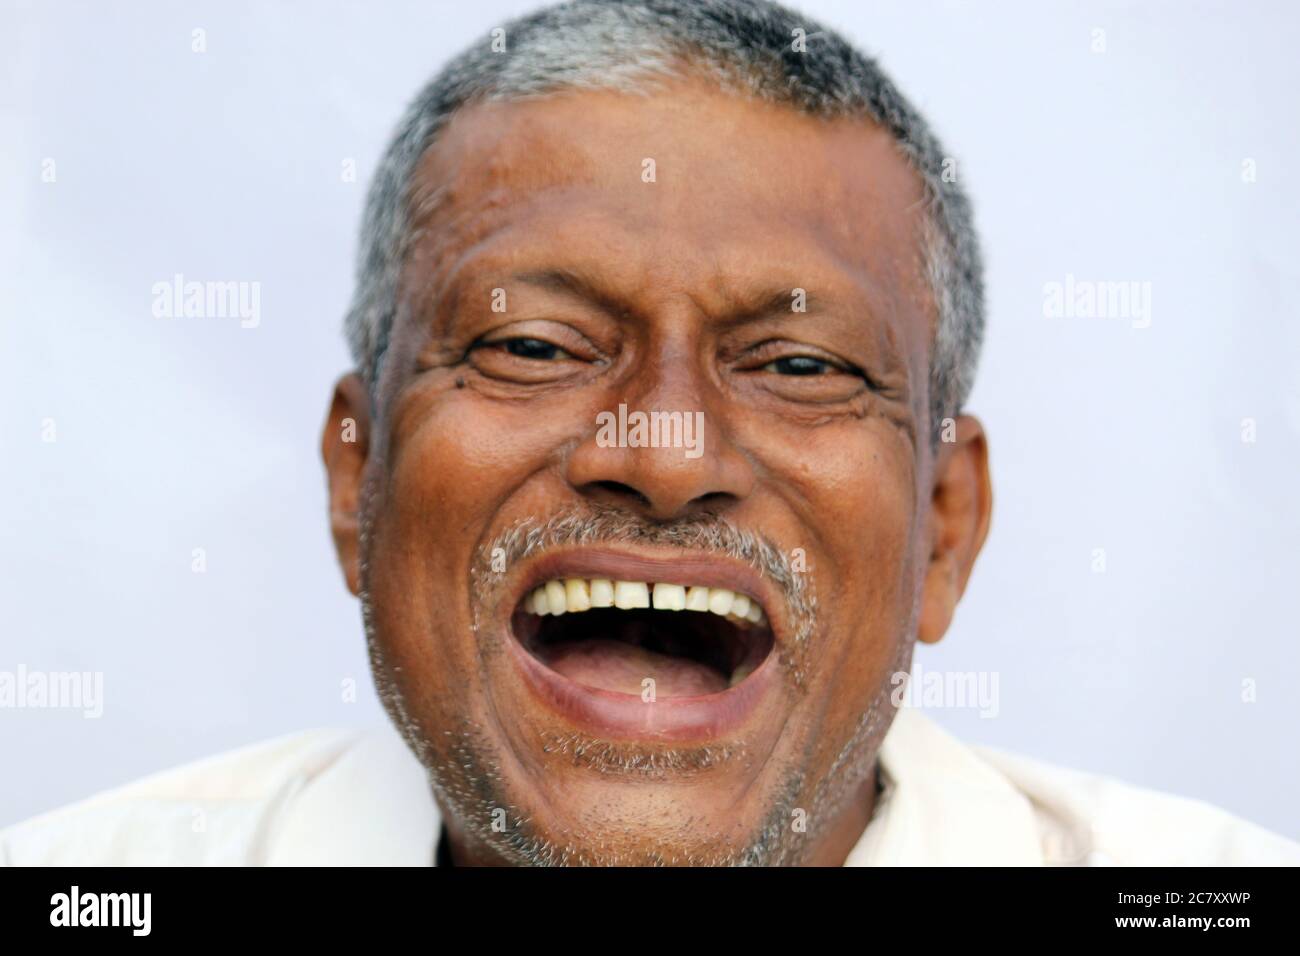 Loud laughing open mouth of a Indian senior man on white background. Stock Photo